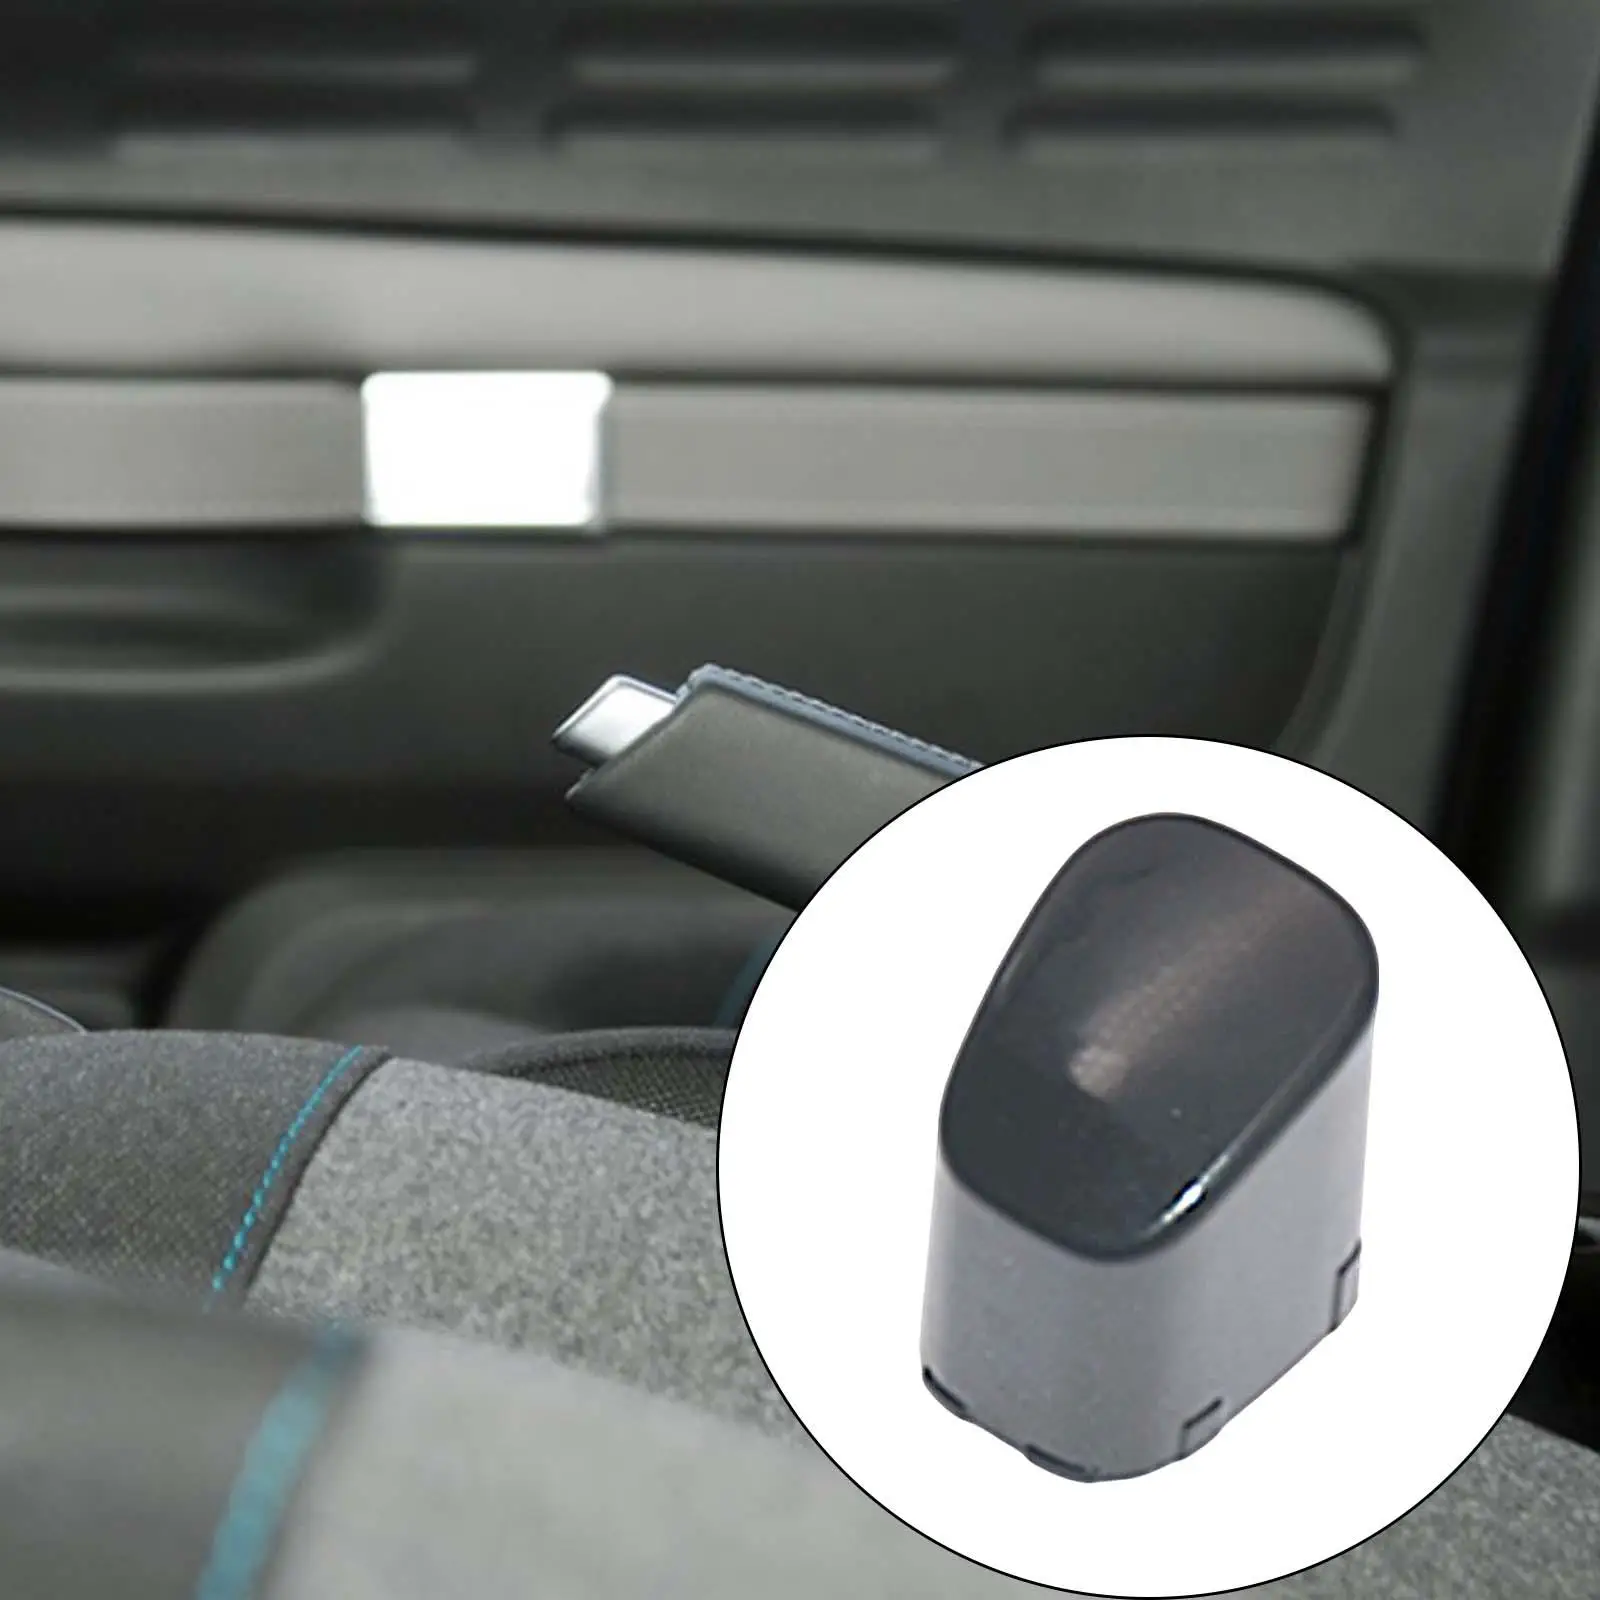 6RD711333A Handbrake Lever Parking Button Cap Car Styling Accessories Handbrake Button Cover for Volkswagen Polo Replaces